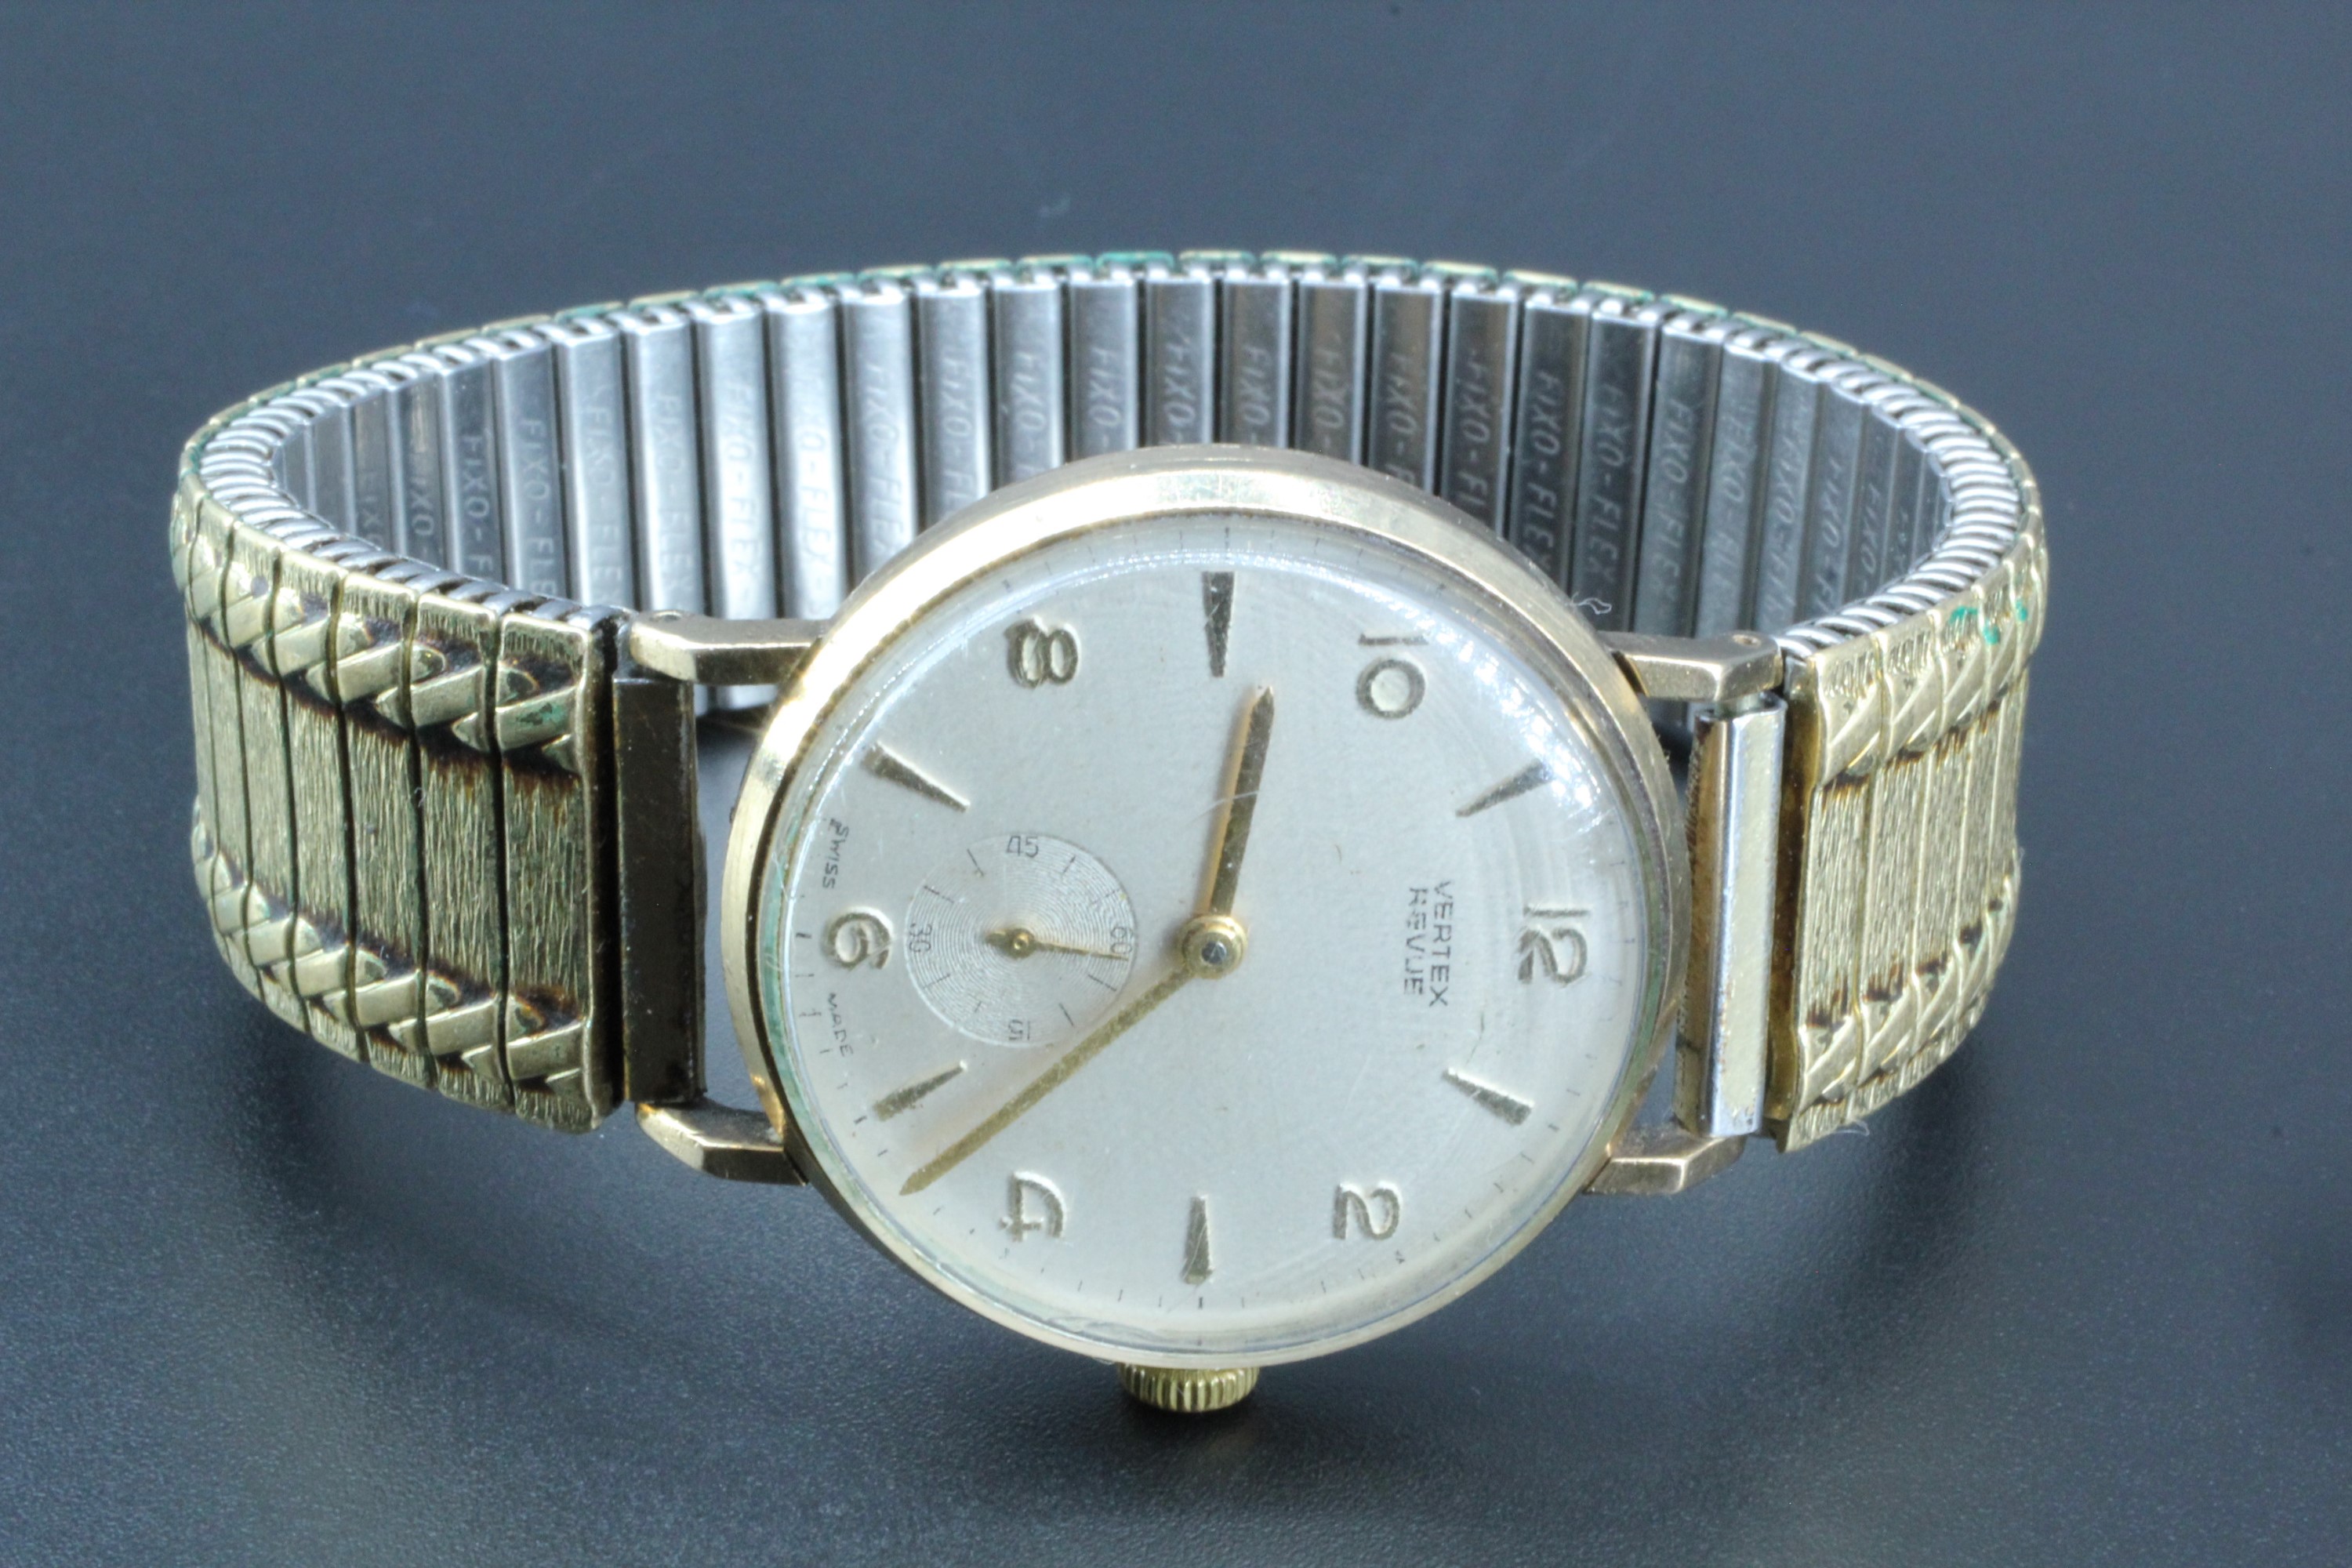 A Vertux 9 ct gold "Revue" wristwatch, having a 17 jewel movement, its frosted silver face having